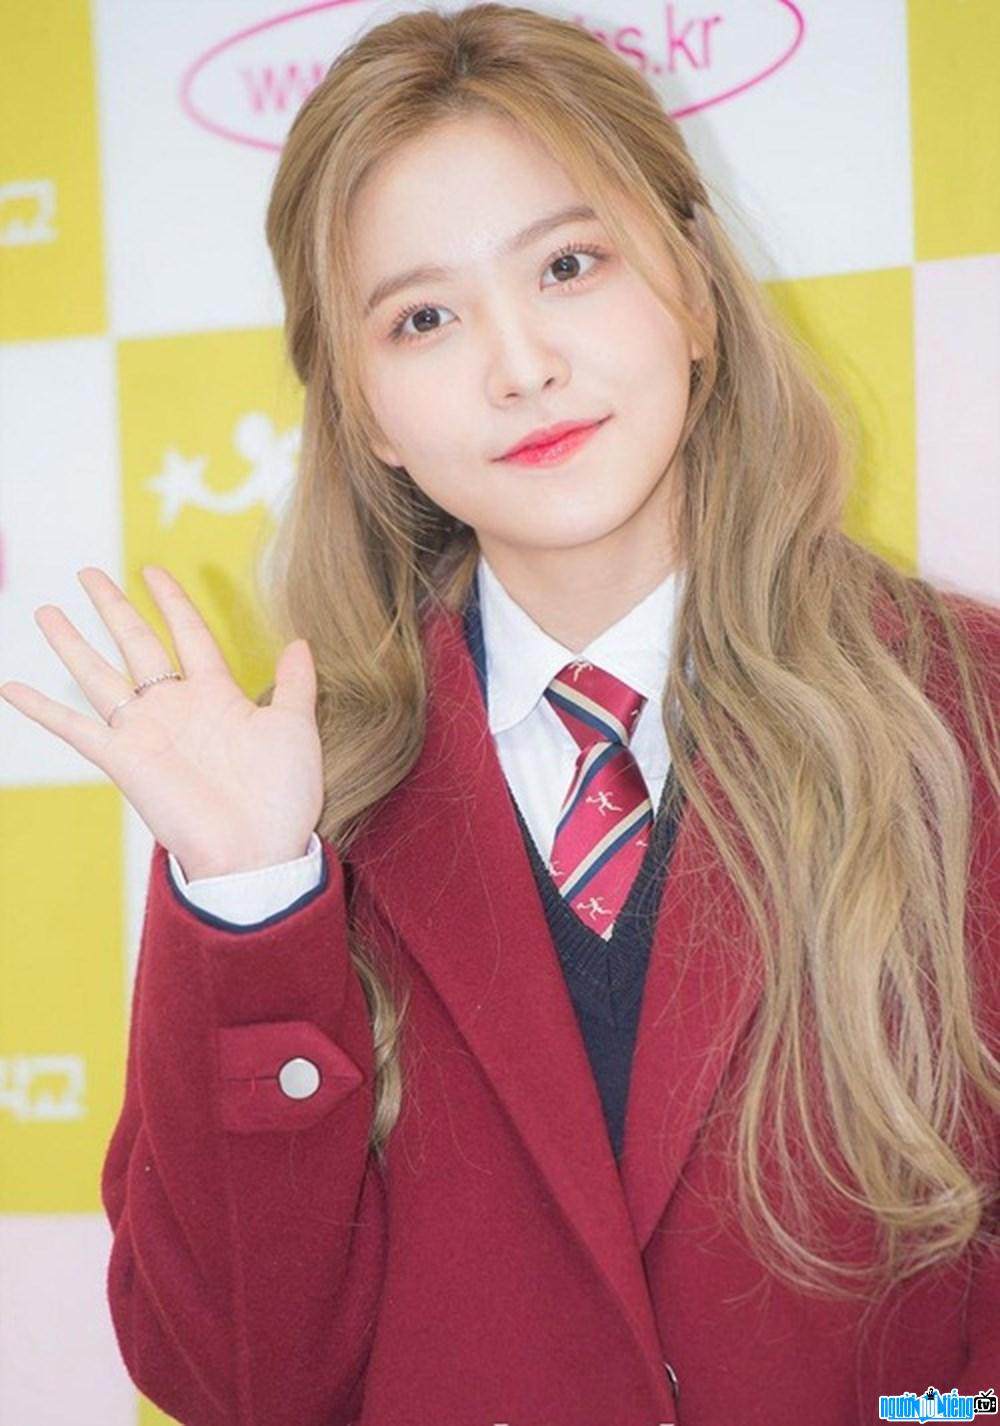 Picture of Yeri at an entertainment event